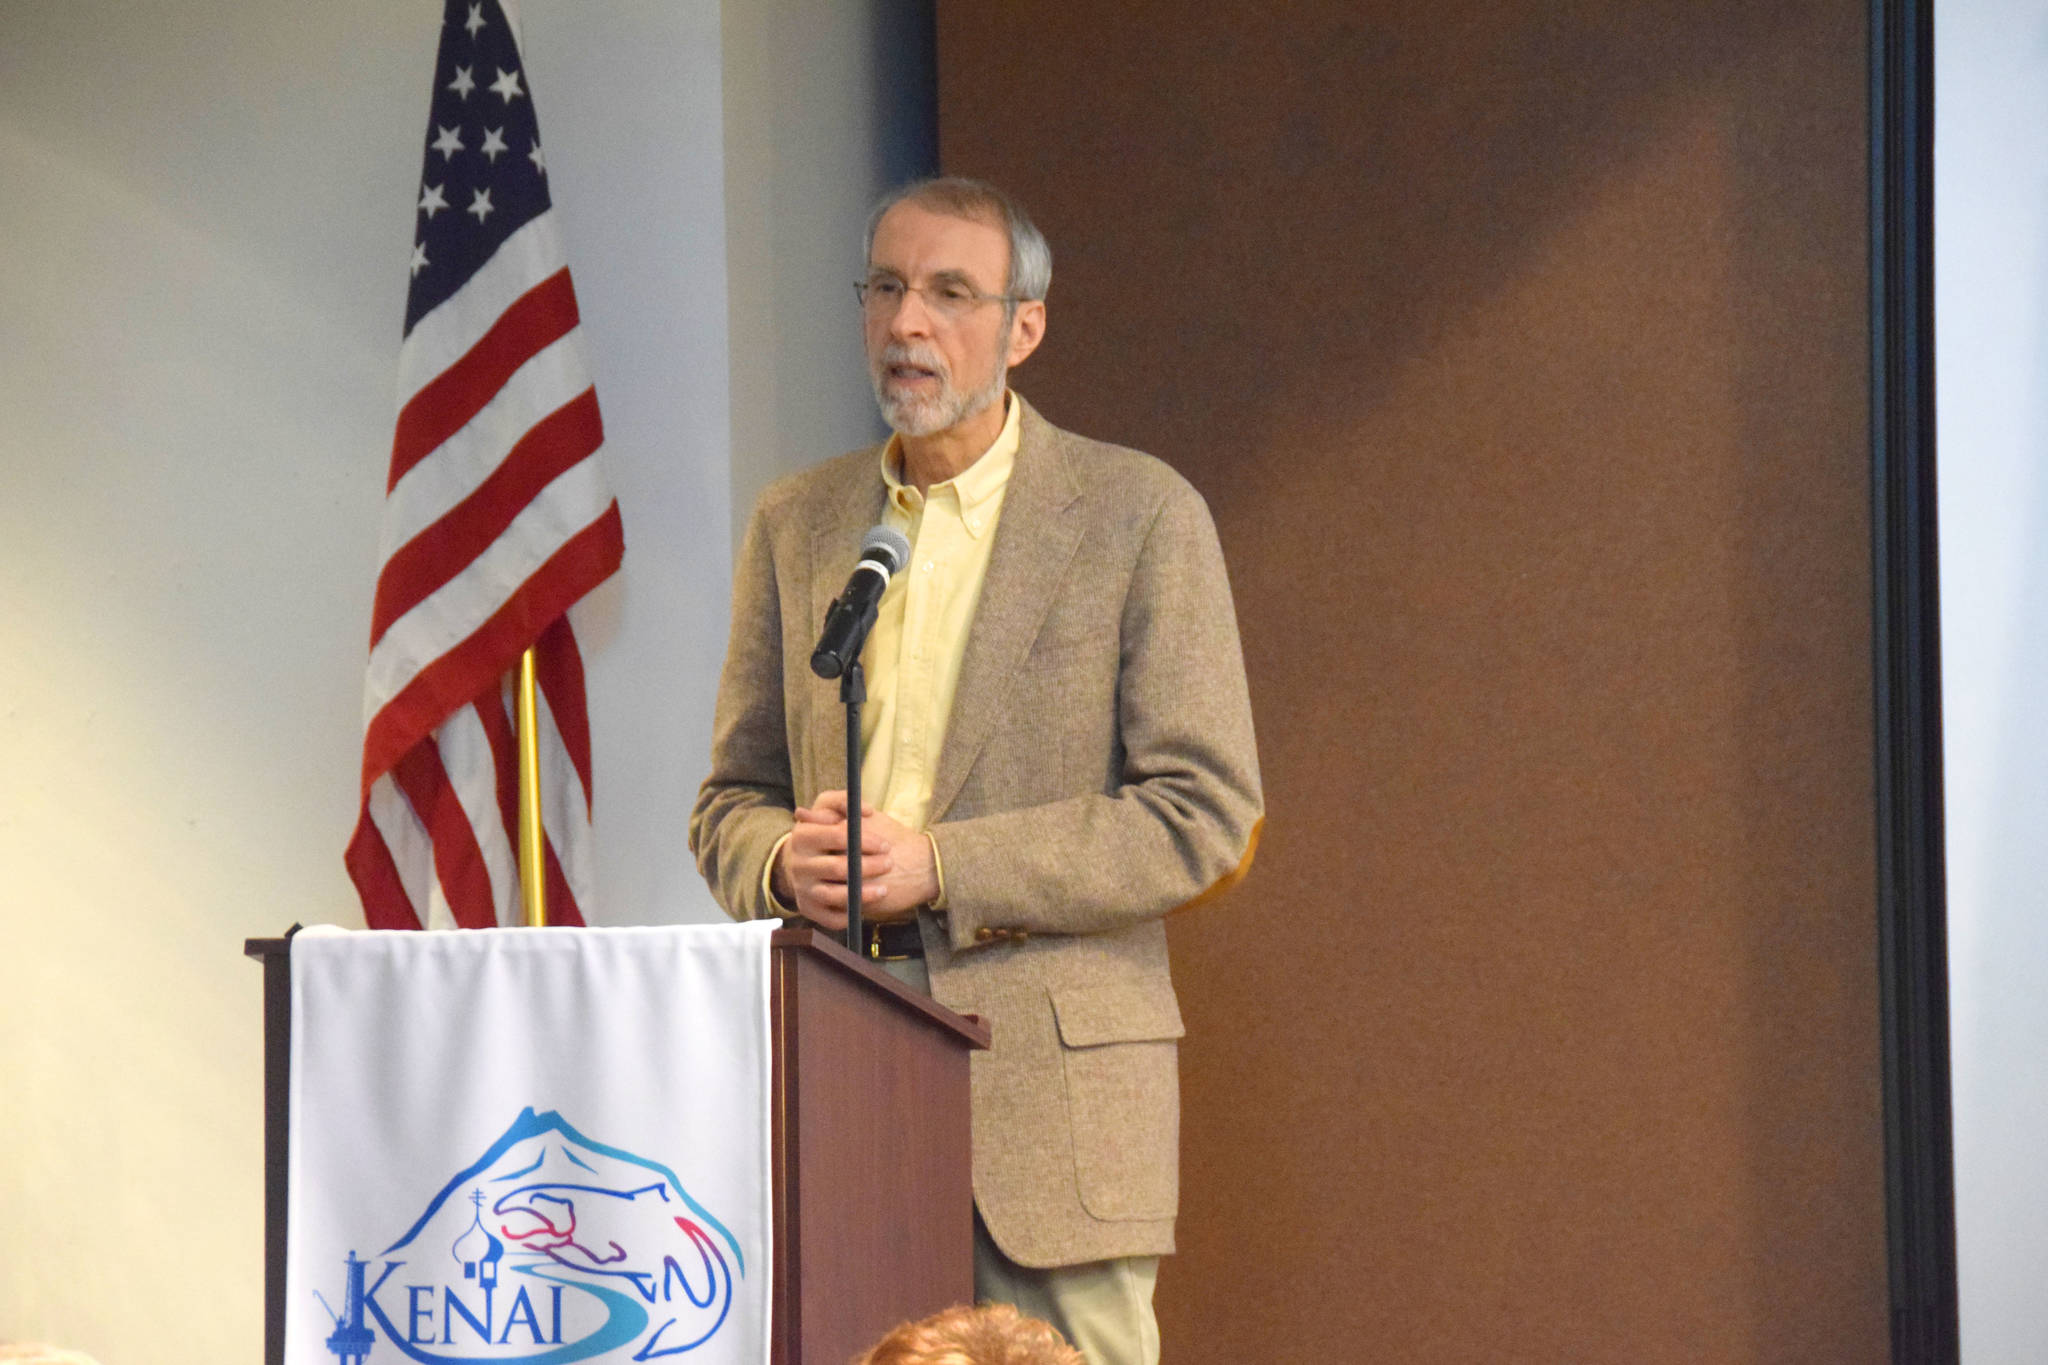 Larry Persily gives a presentation at the Kenai/Soldotna joint chamber luncheon on Wednesday, Feb. 6, 2019. (Photo by Brian Mazurek/Peninsula Clarion)